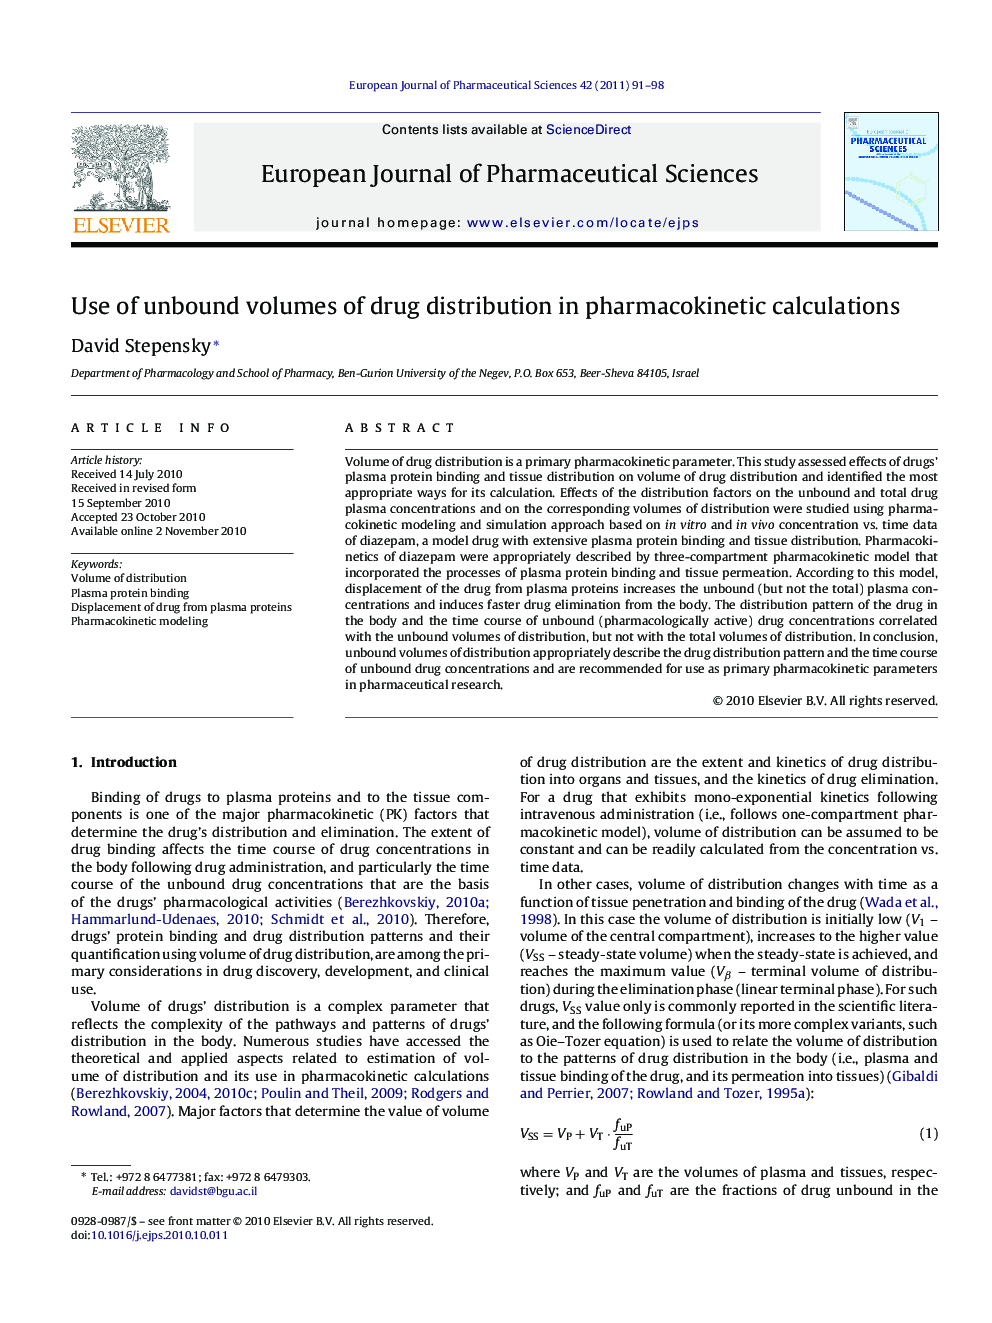 Use of unbound volumes of drug distribution in pharmacokinetic calculations